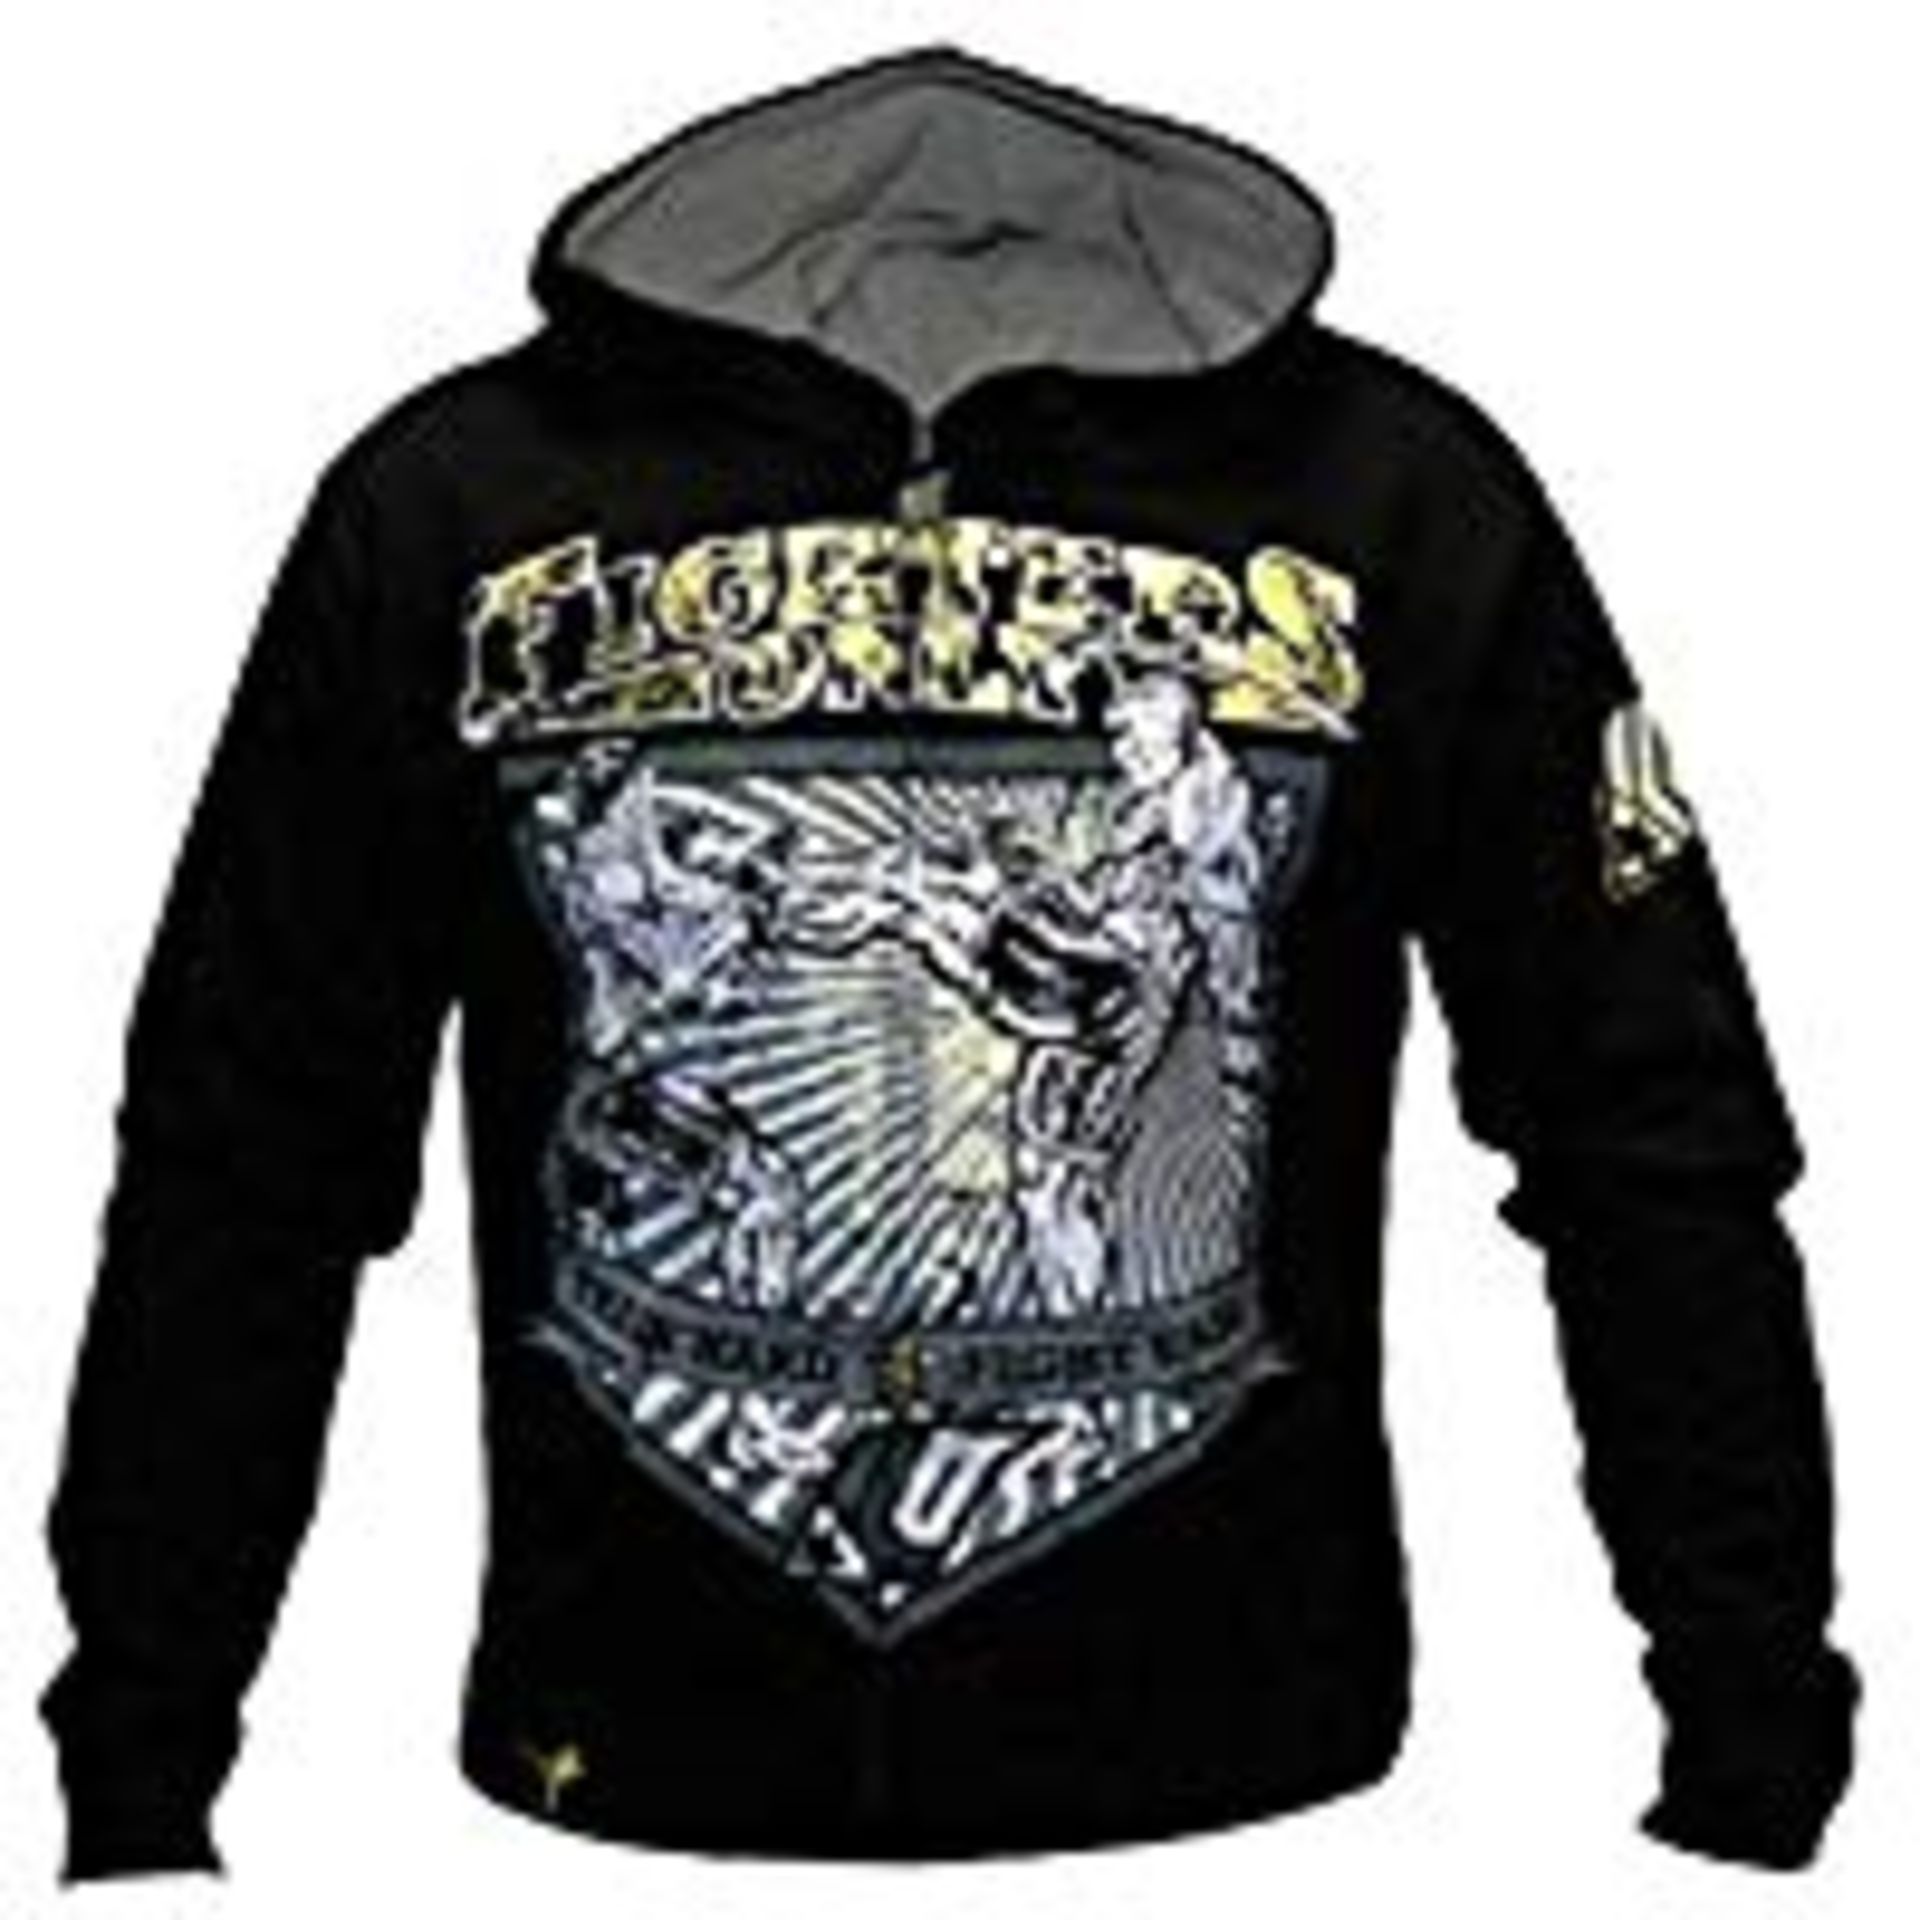 Approx. 24 Fighters Only the Kick Hoodies - Black - Image 2 of 2